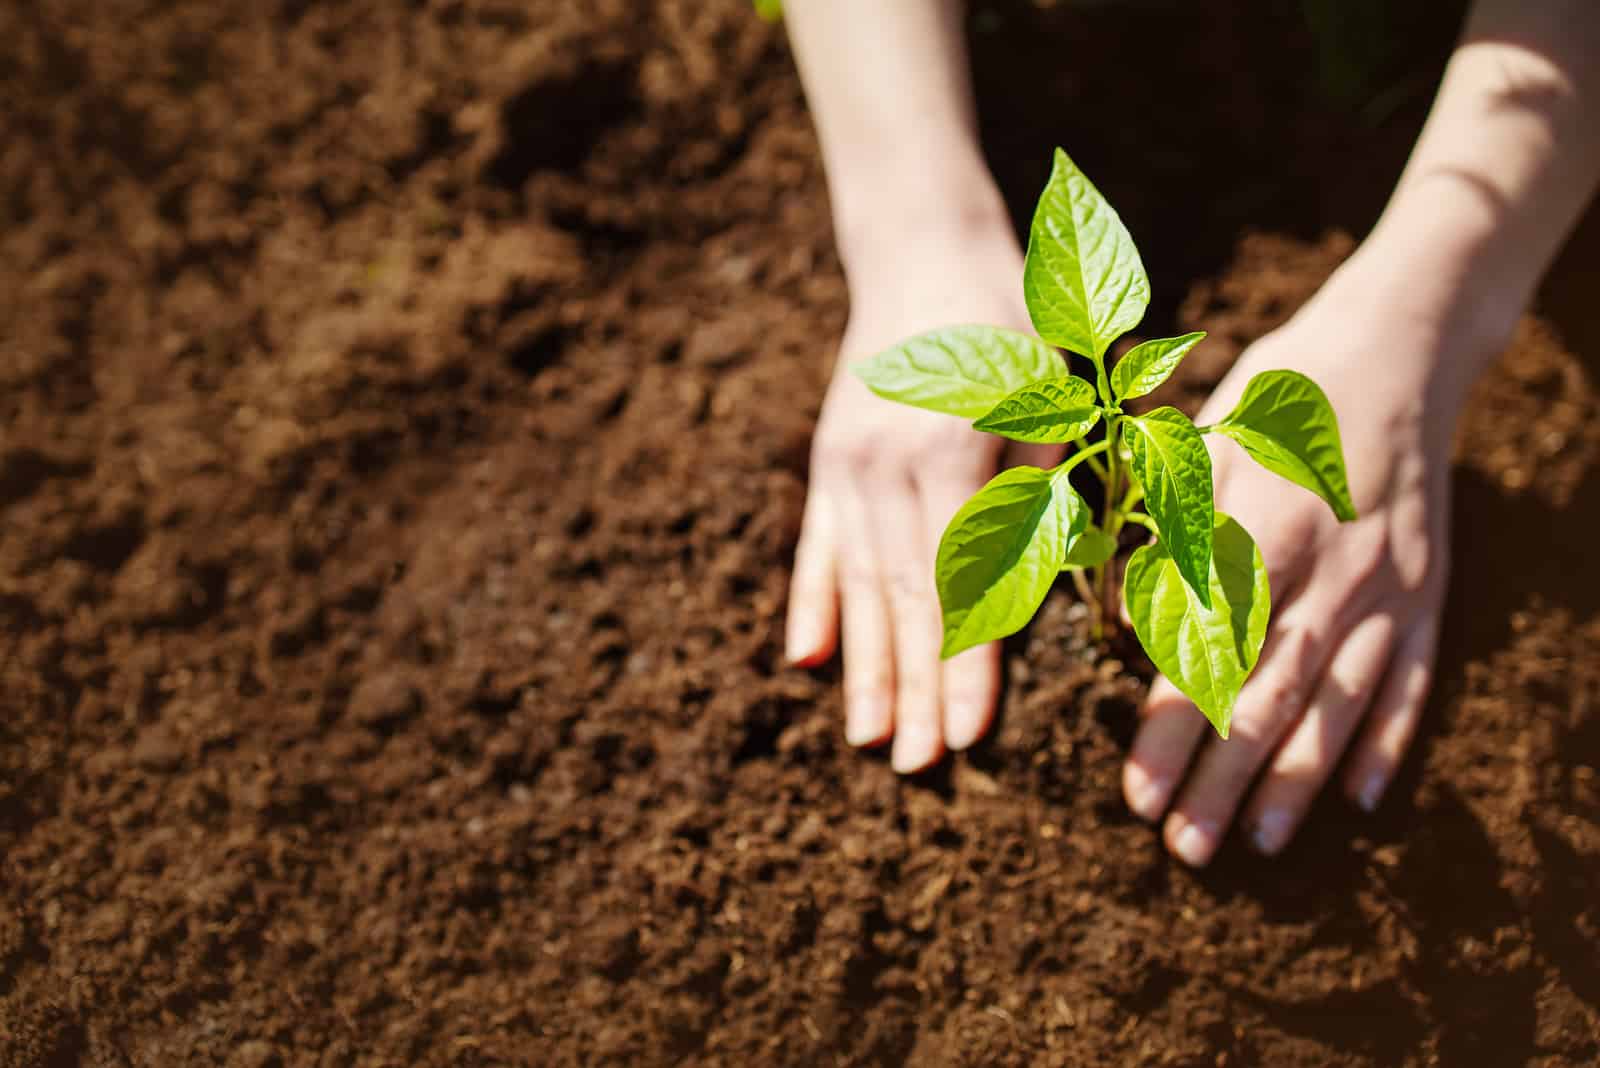  woman taking care of a pepper seedling in the soil